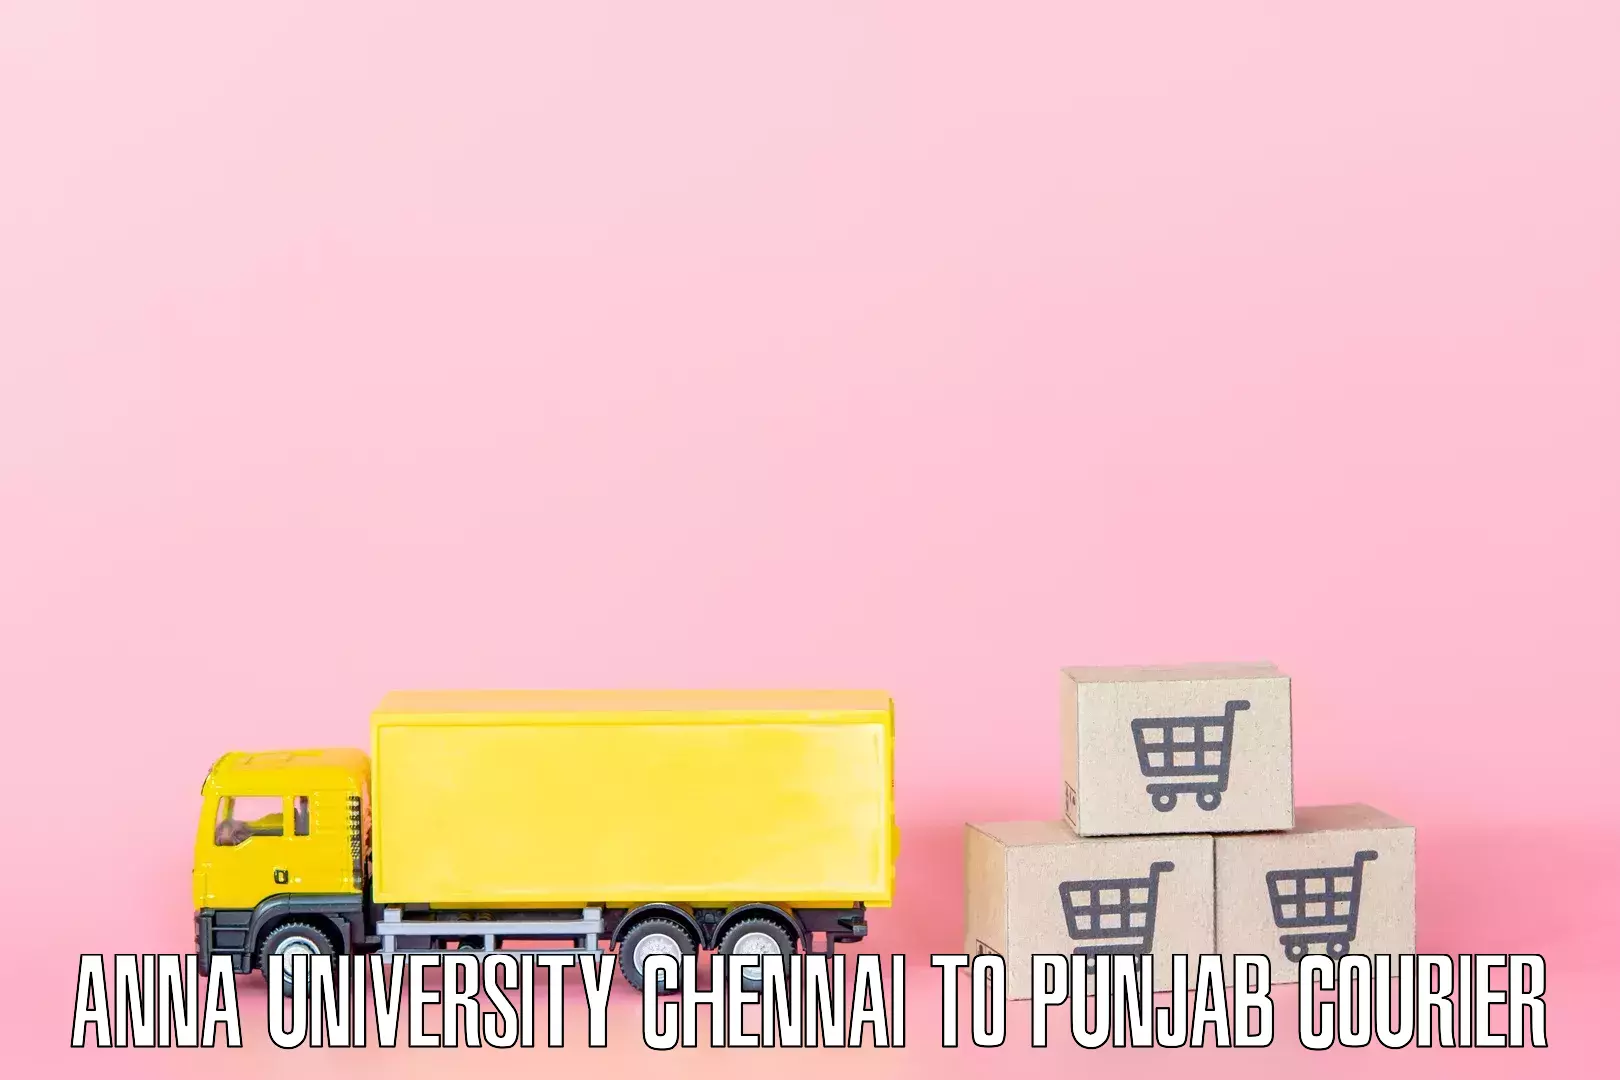 Professional packing services in Anna University Chennai to Central University of Punjab Bathinda